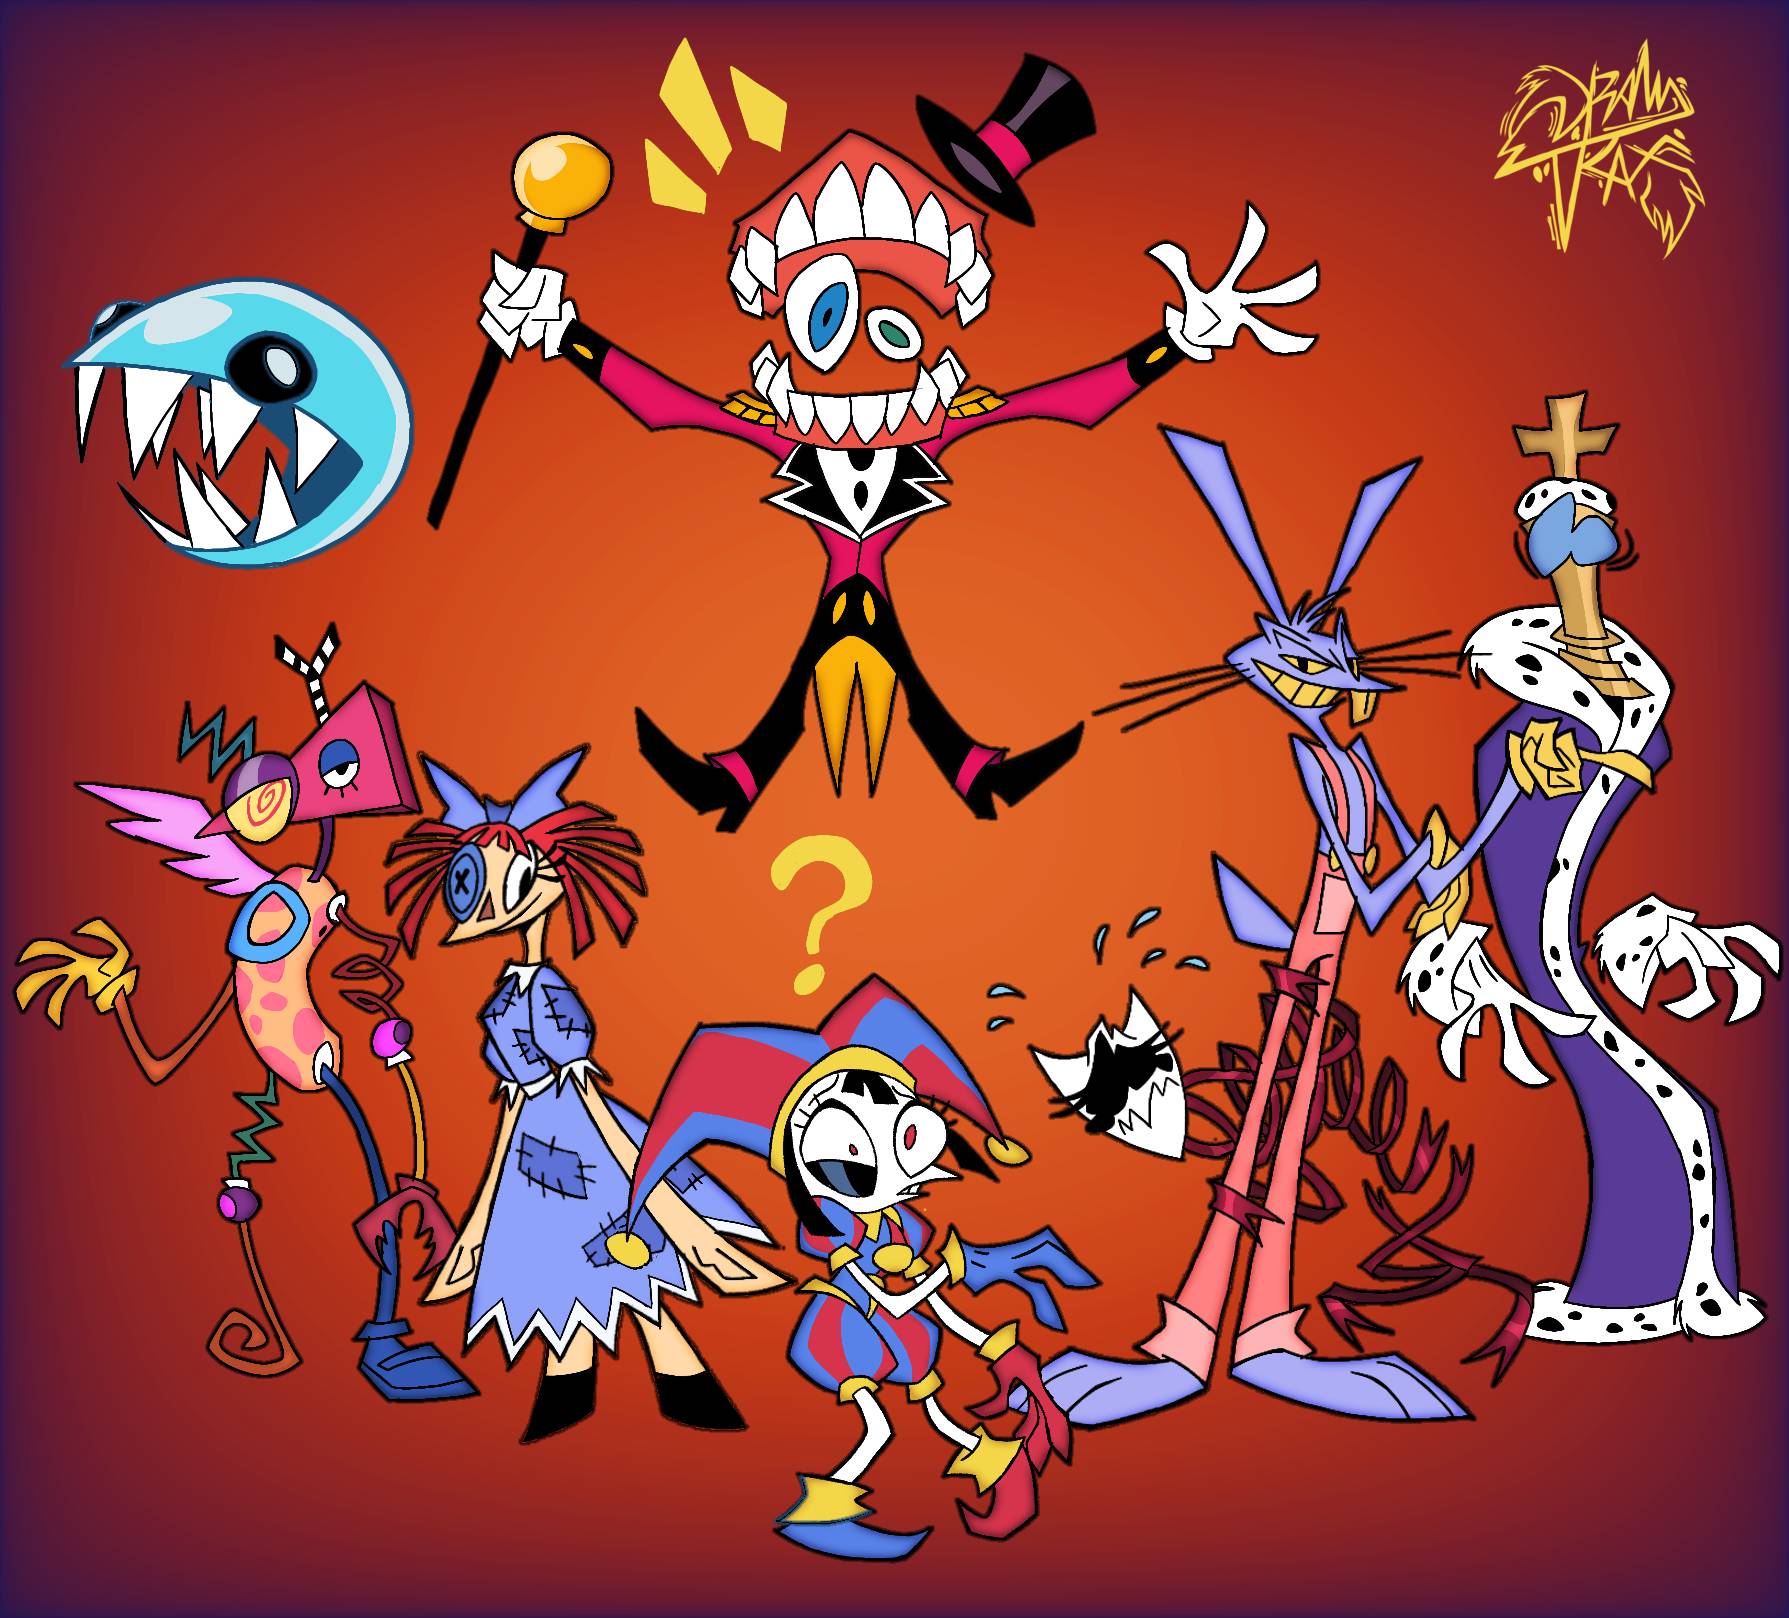 THE AMAZING DIGITAL CIRCUS by drawtrax on DeviantArt